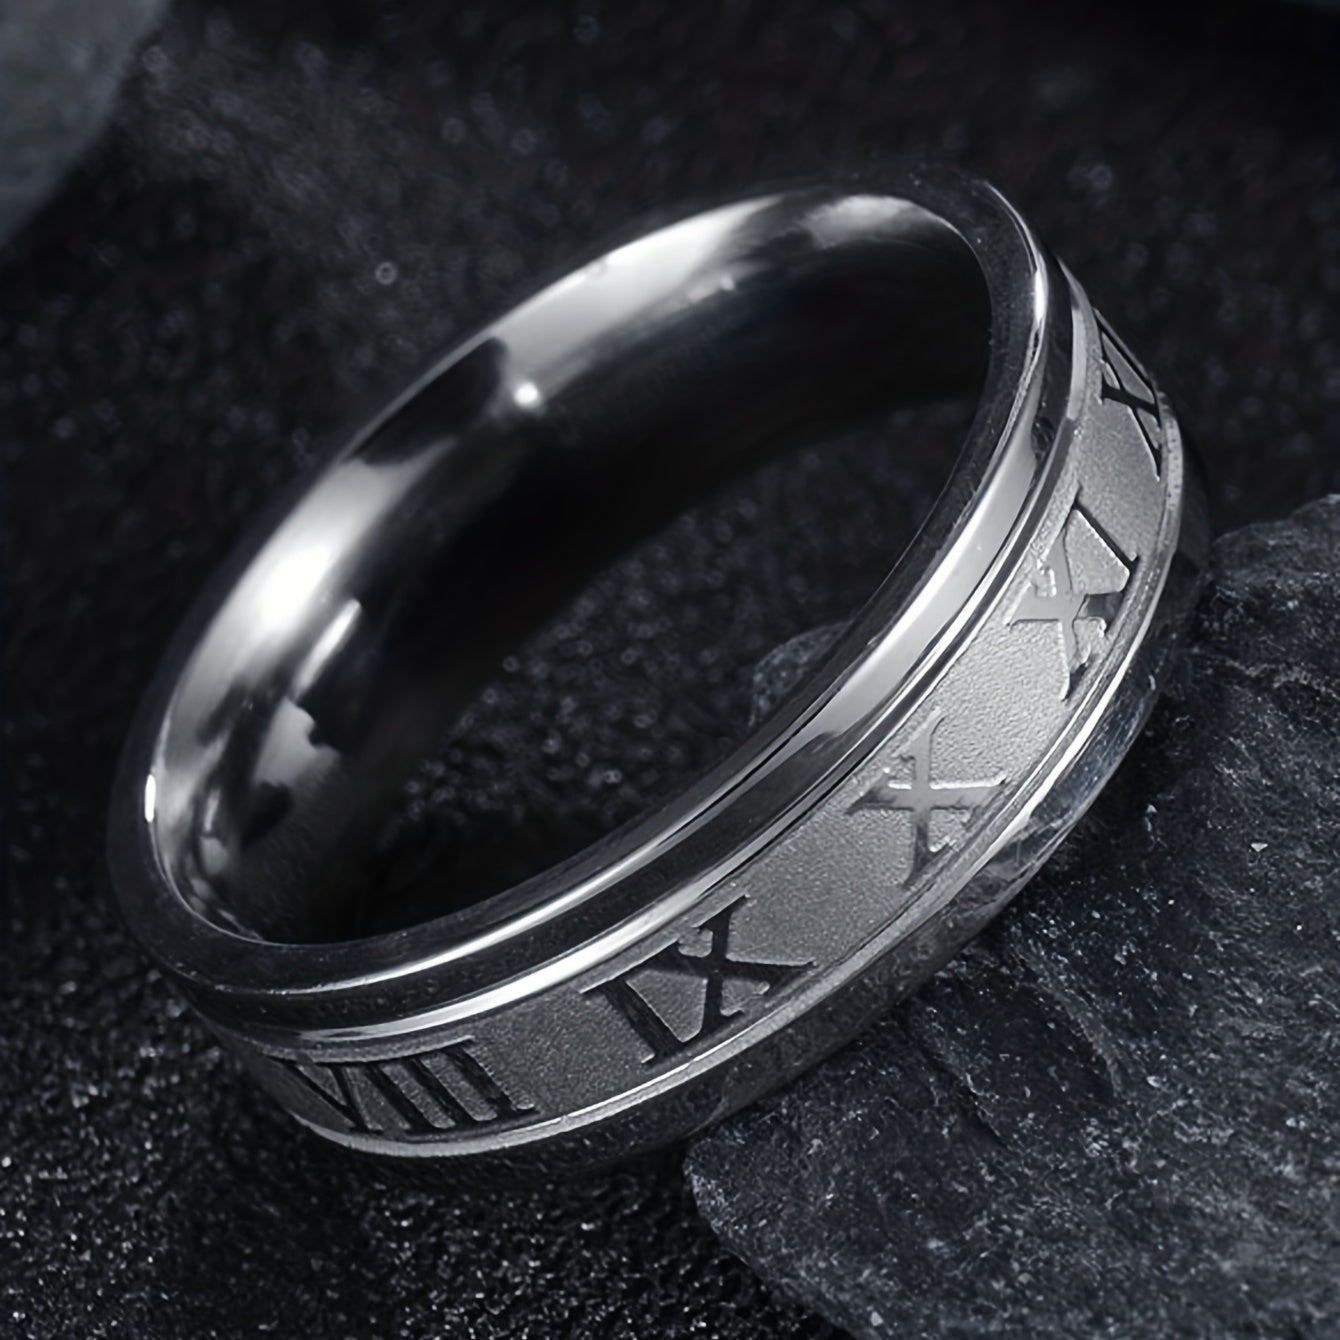 Elegant Stainless Steel Ring with Roman Numerals - Perfect for Daily Wear and Special Occasions